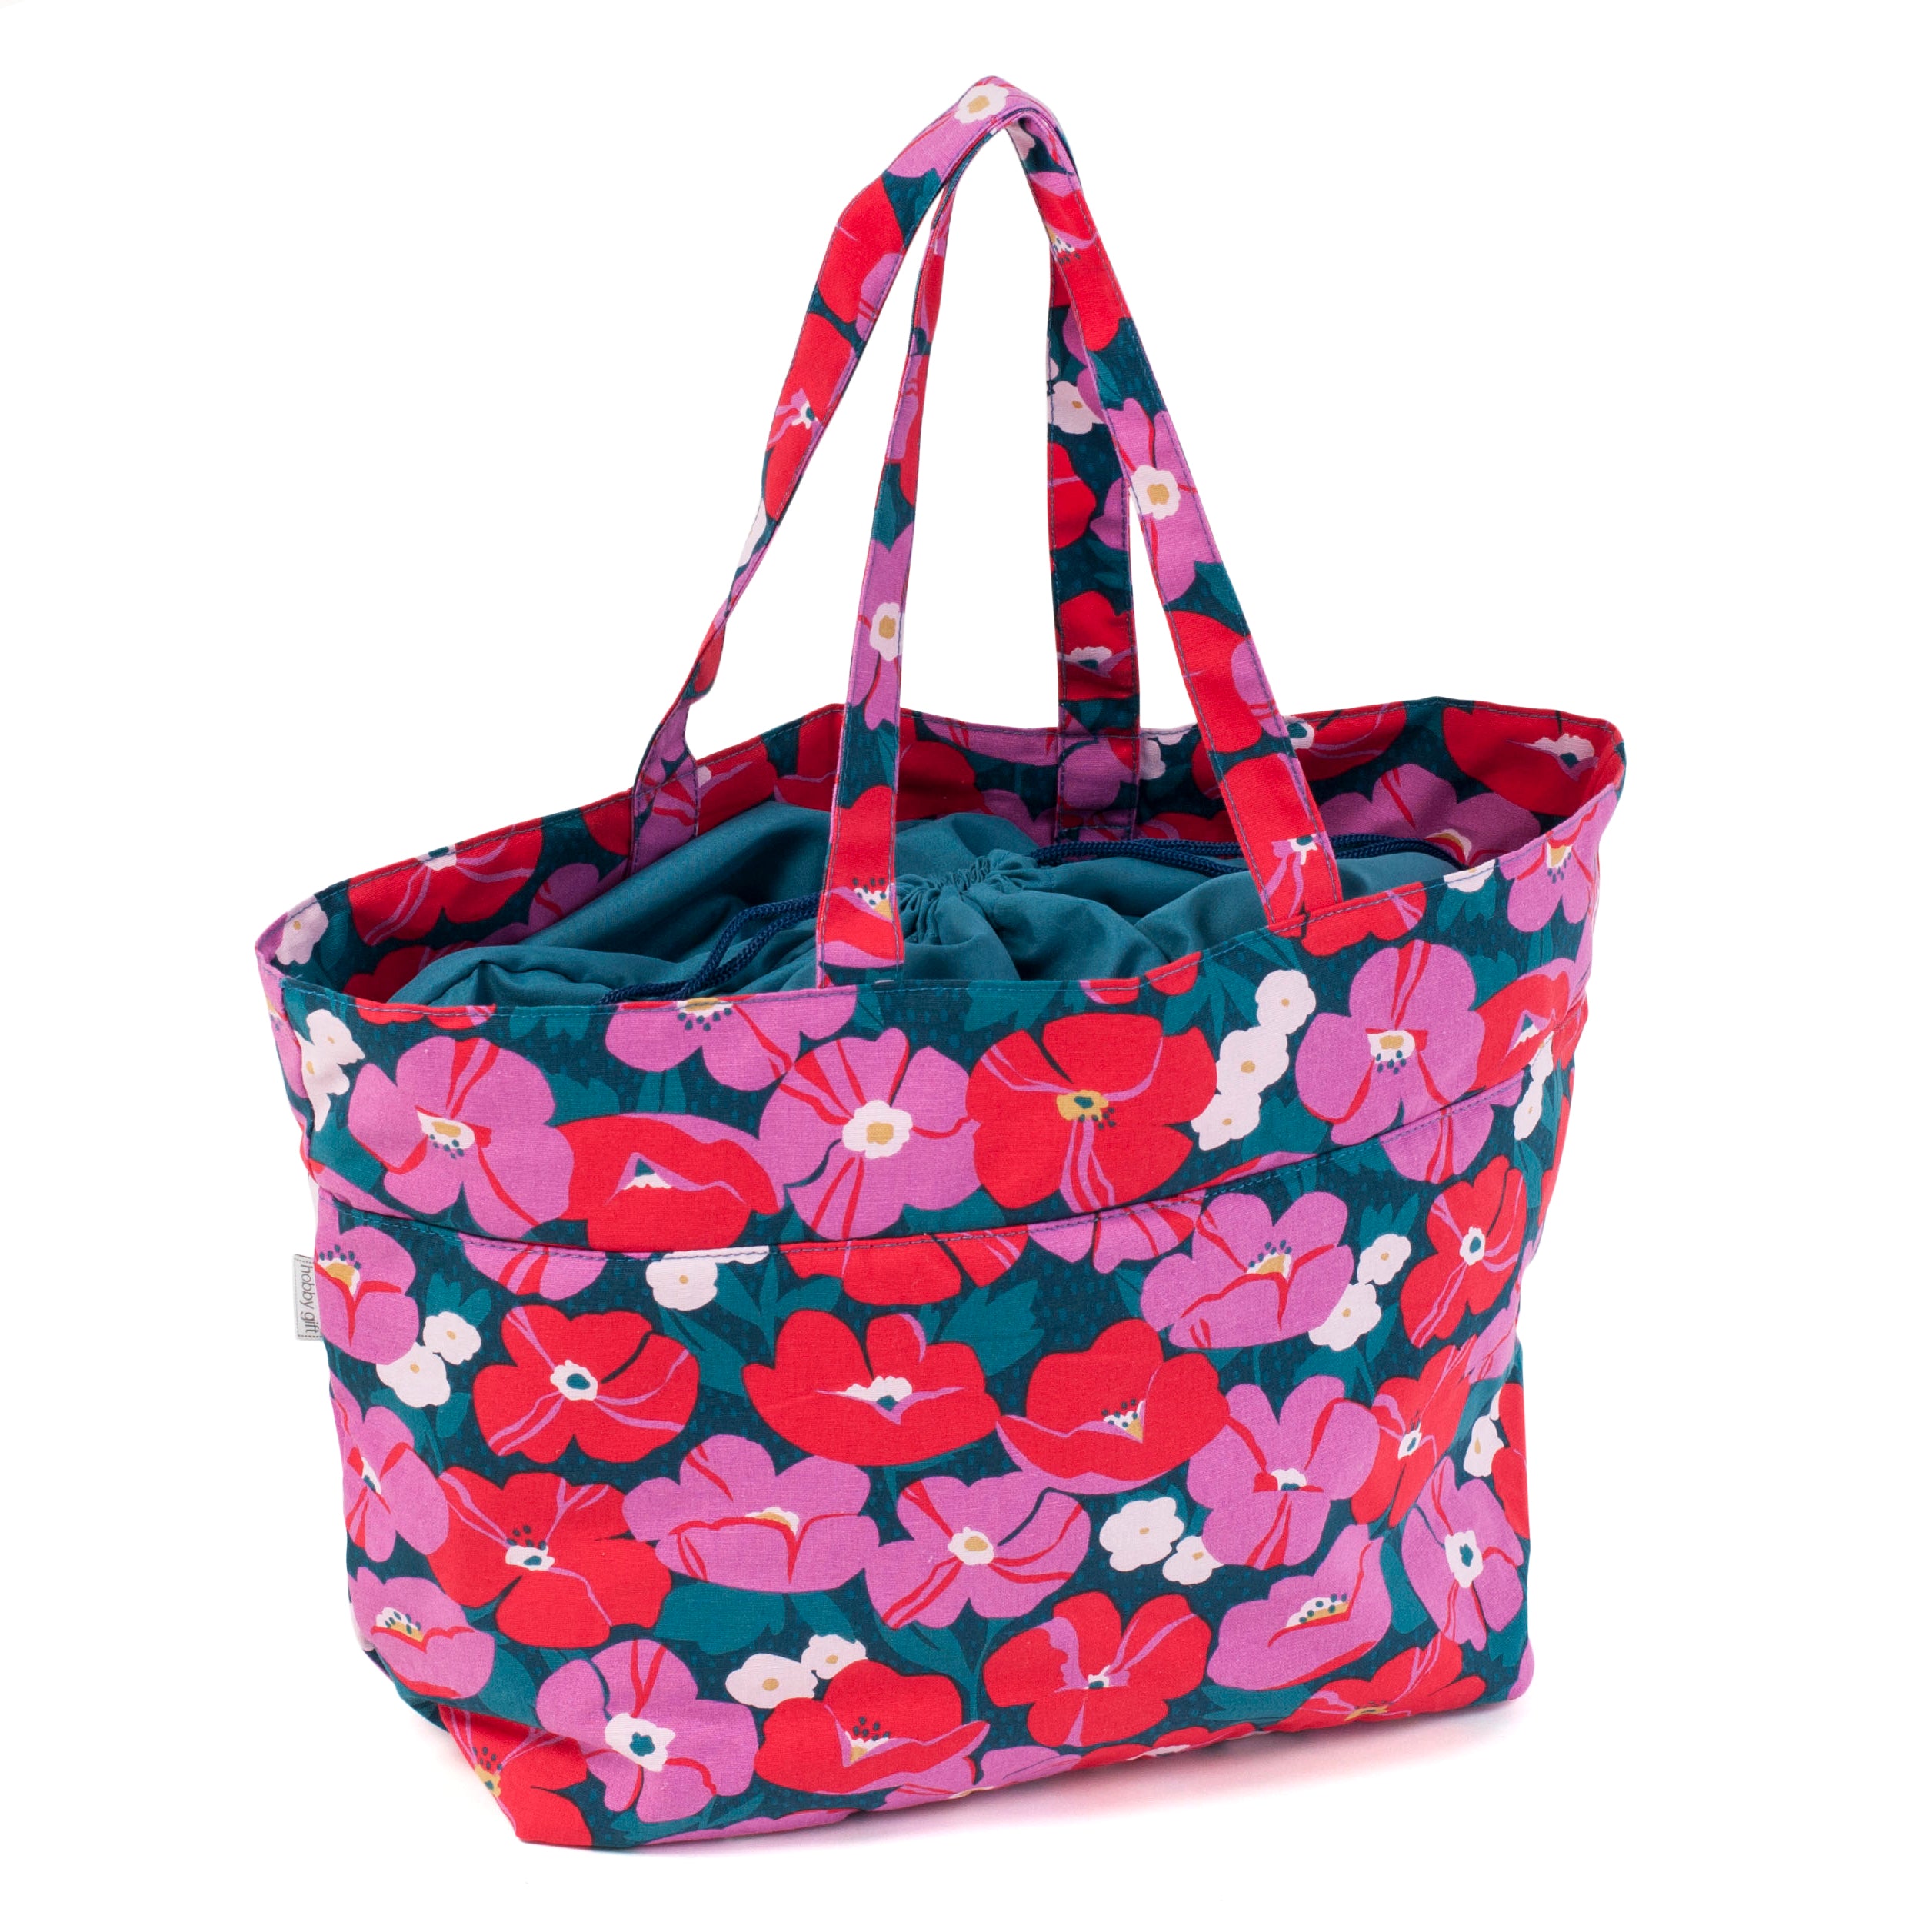 Craft Bag: Drawstring: Navy with Pink and Red Flowers